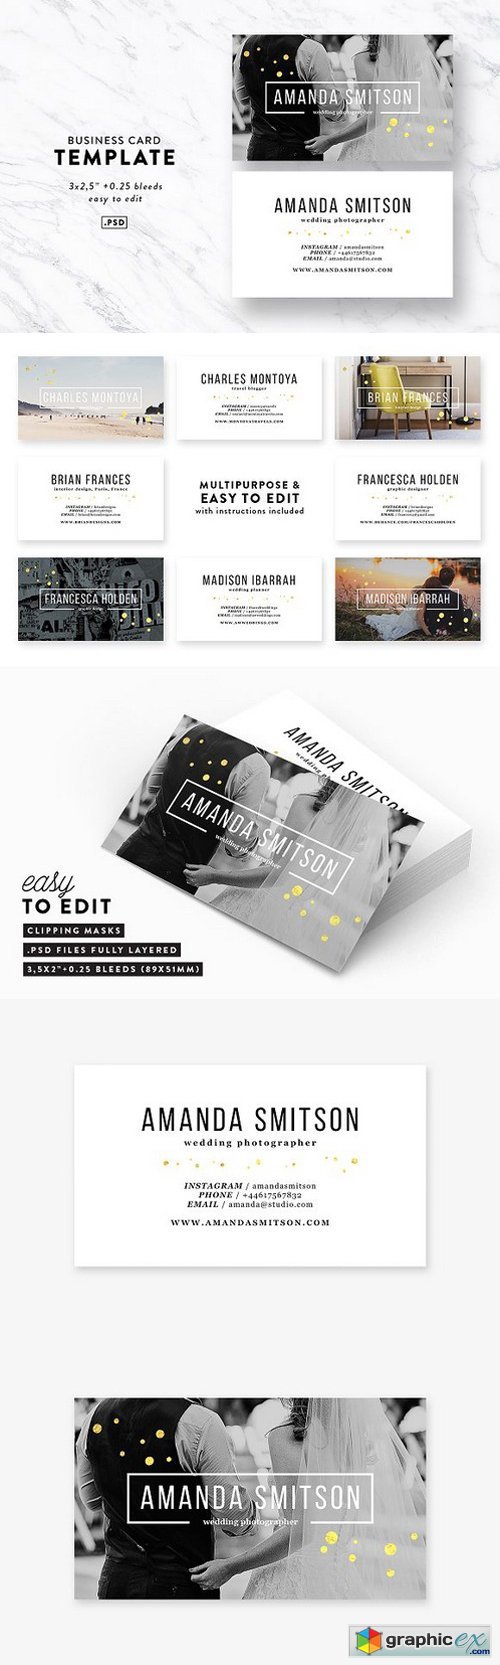 Photography Business Card Template 1594330